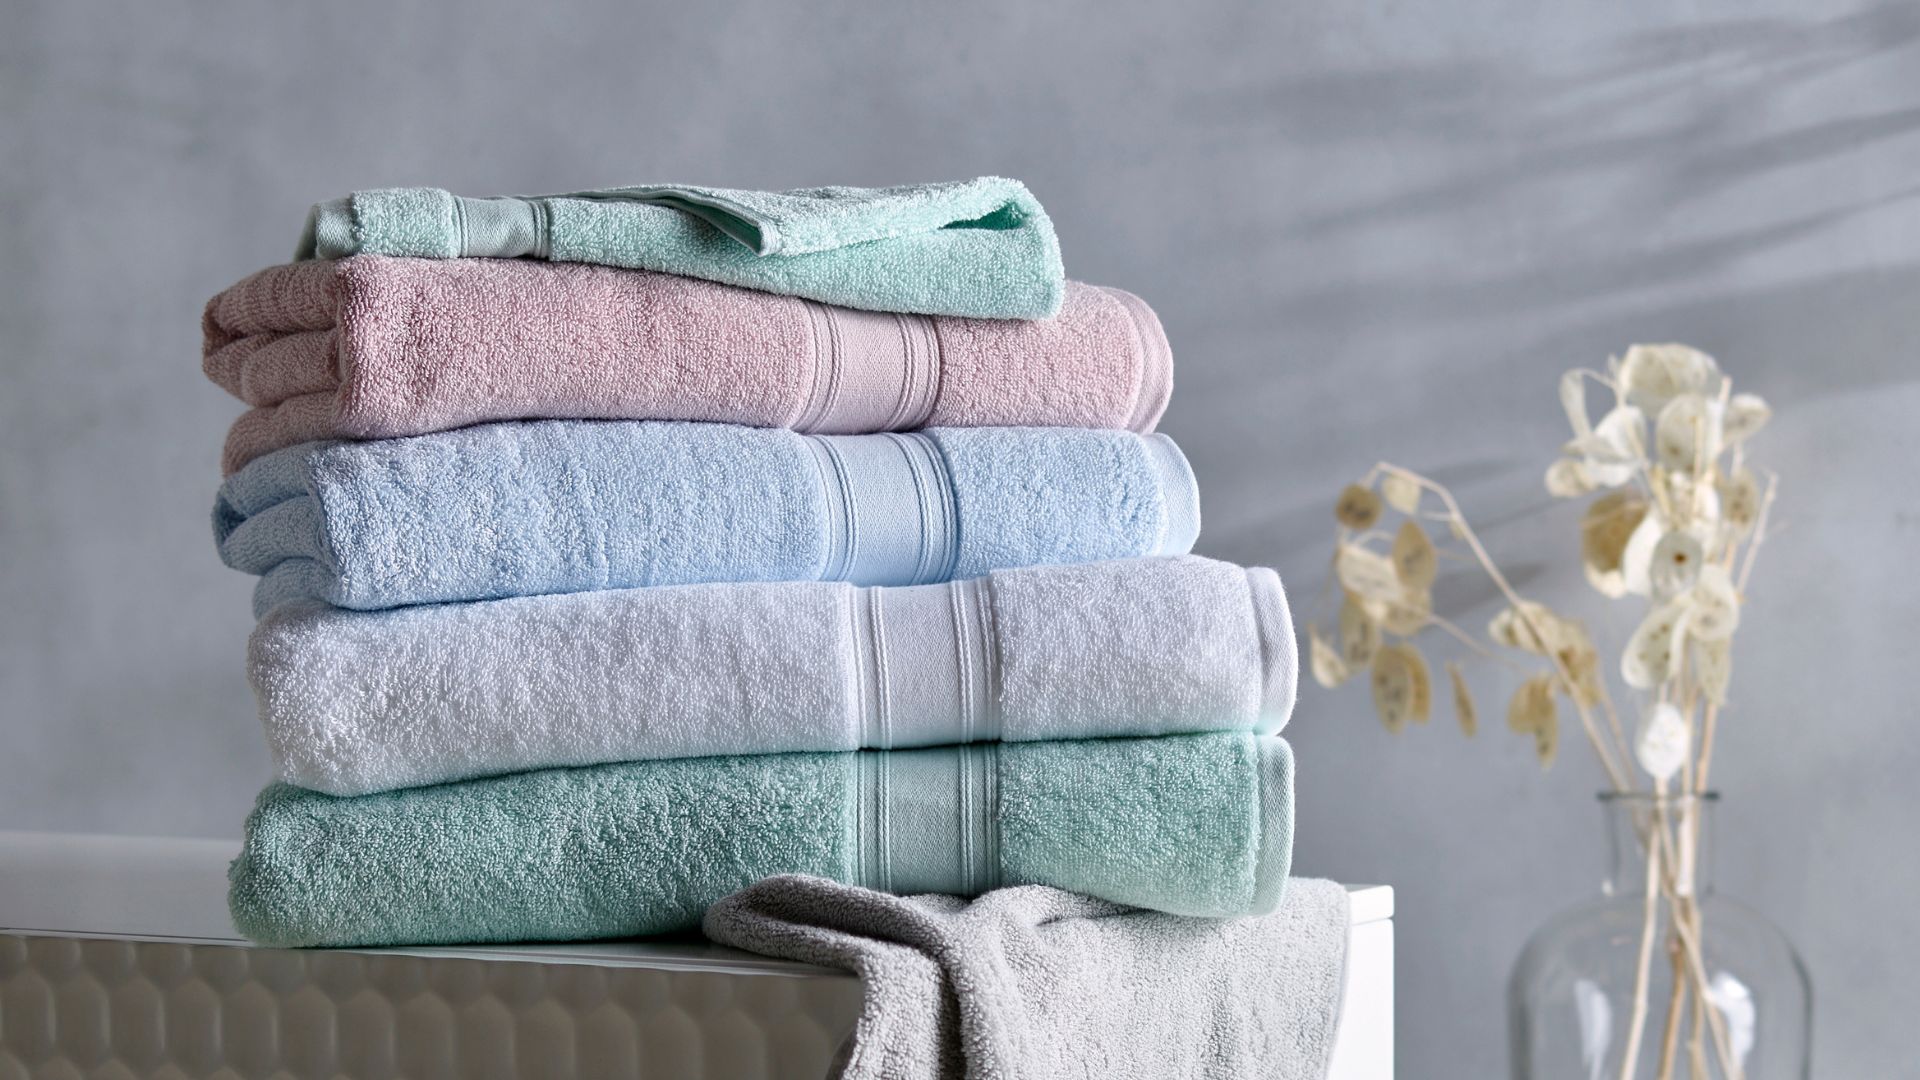 How to wash towels properly?